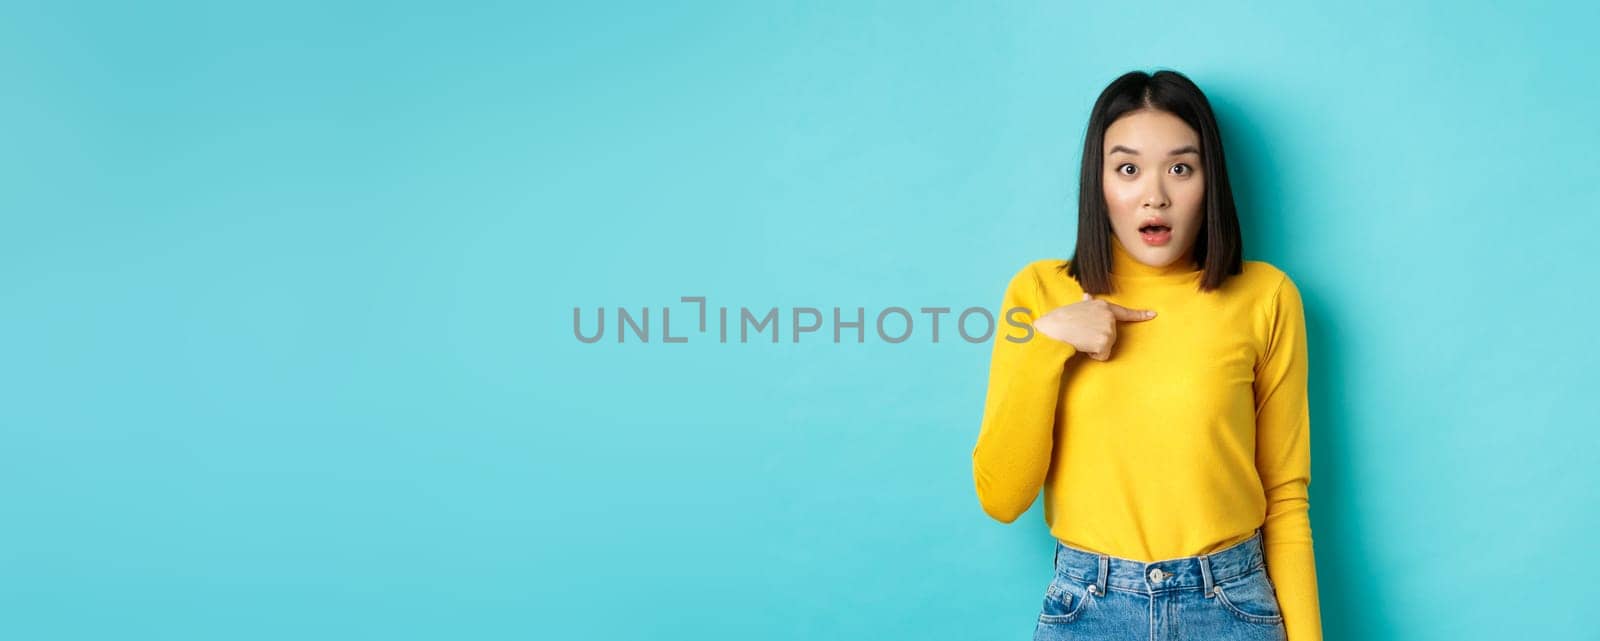 Image of surprised asian girl gasping and pointing at herself with disbelief, standing over blue background.